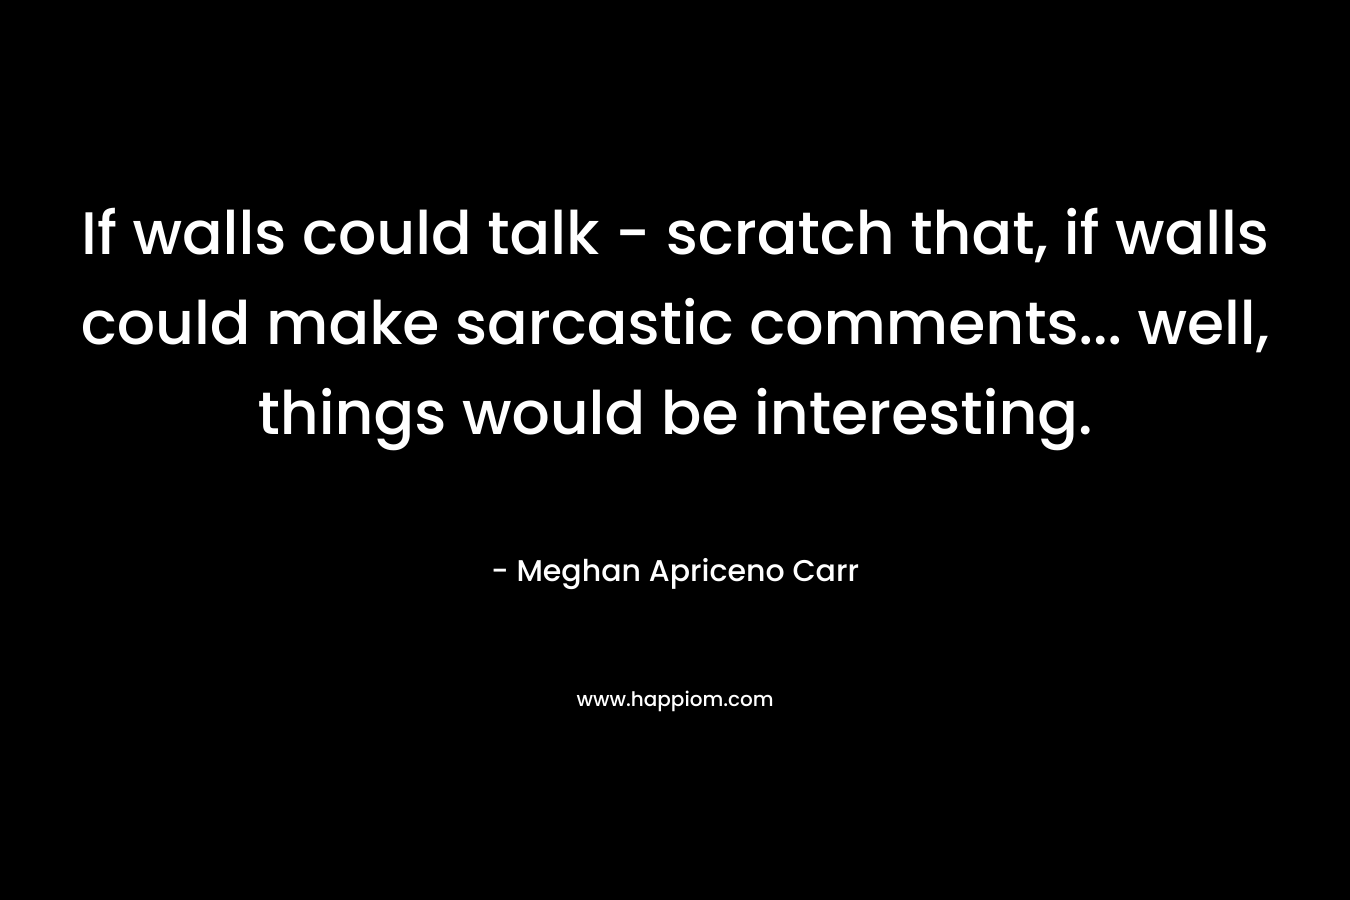 If walls could talk – scratch that, if walls could make sarcastic comments… well, things would be interesting. – Meghan Apriceno Carr